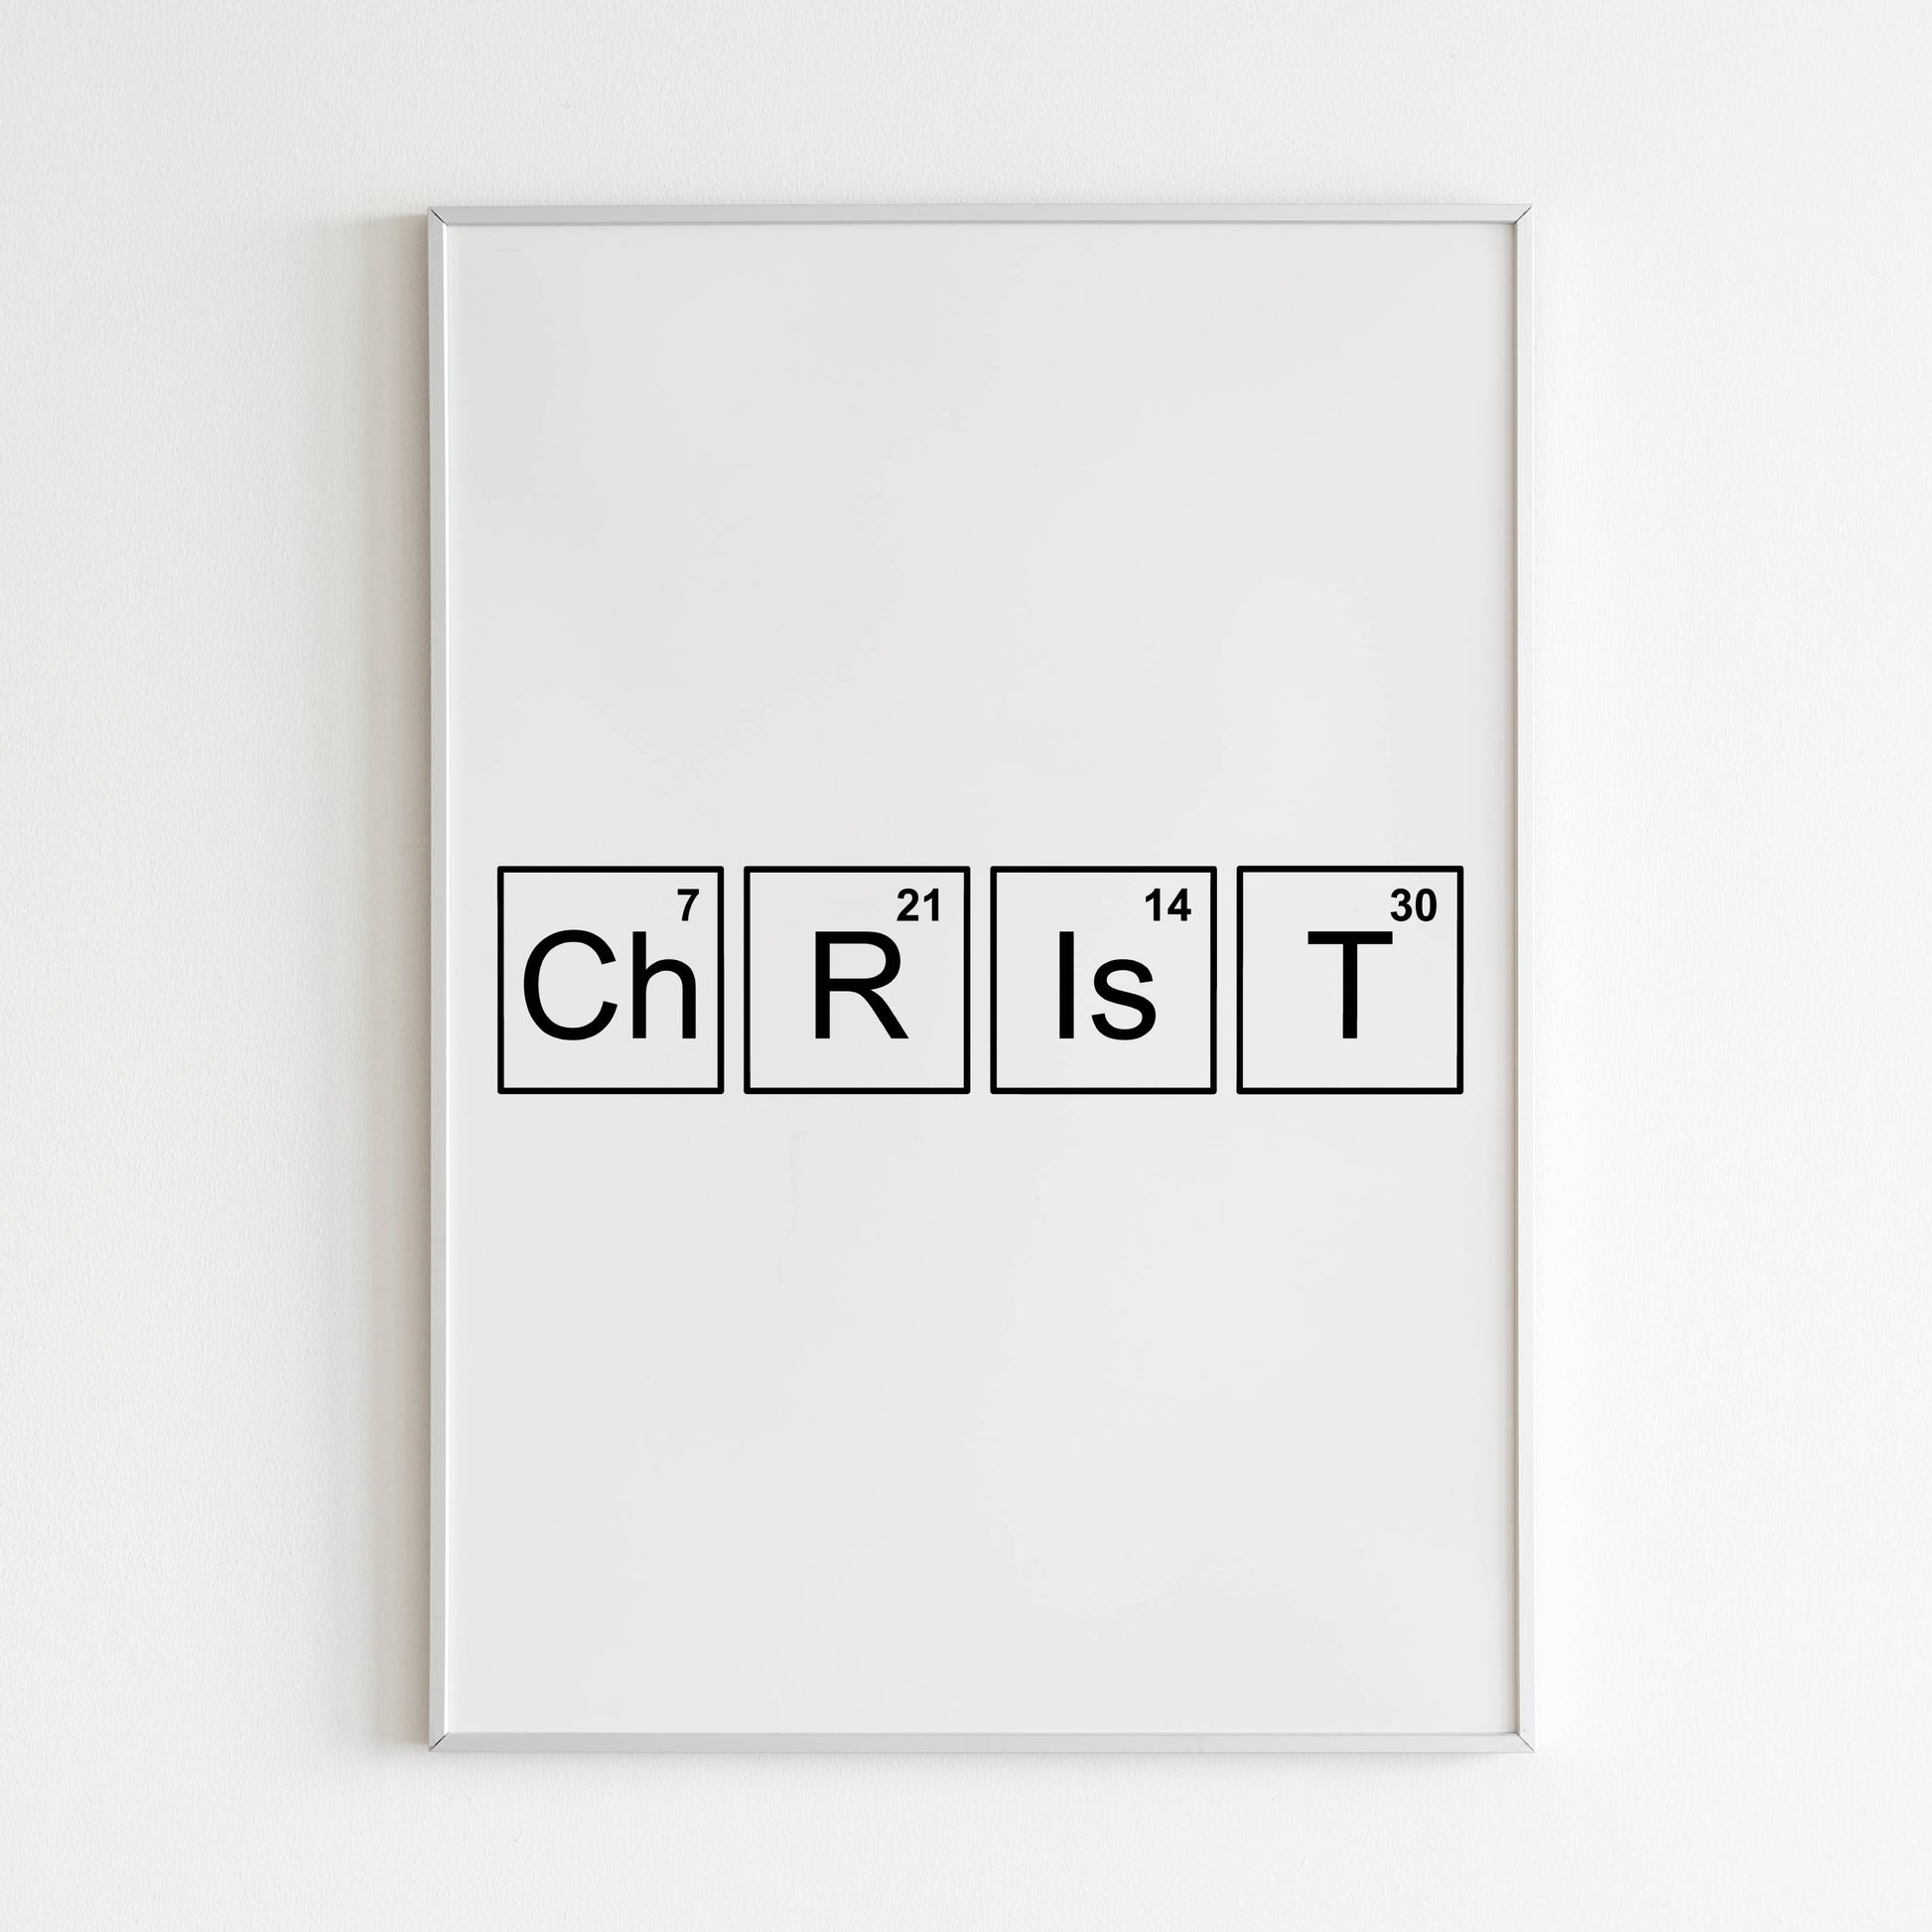 Downloadable "Christ" wall art for a message of faith.